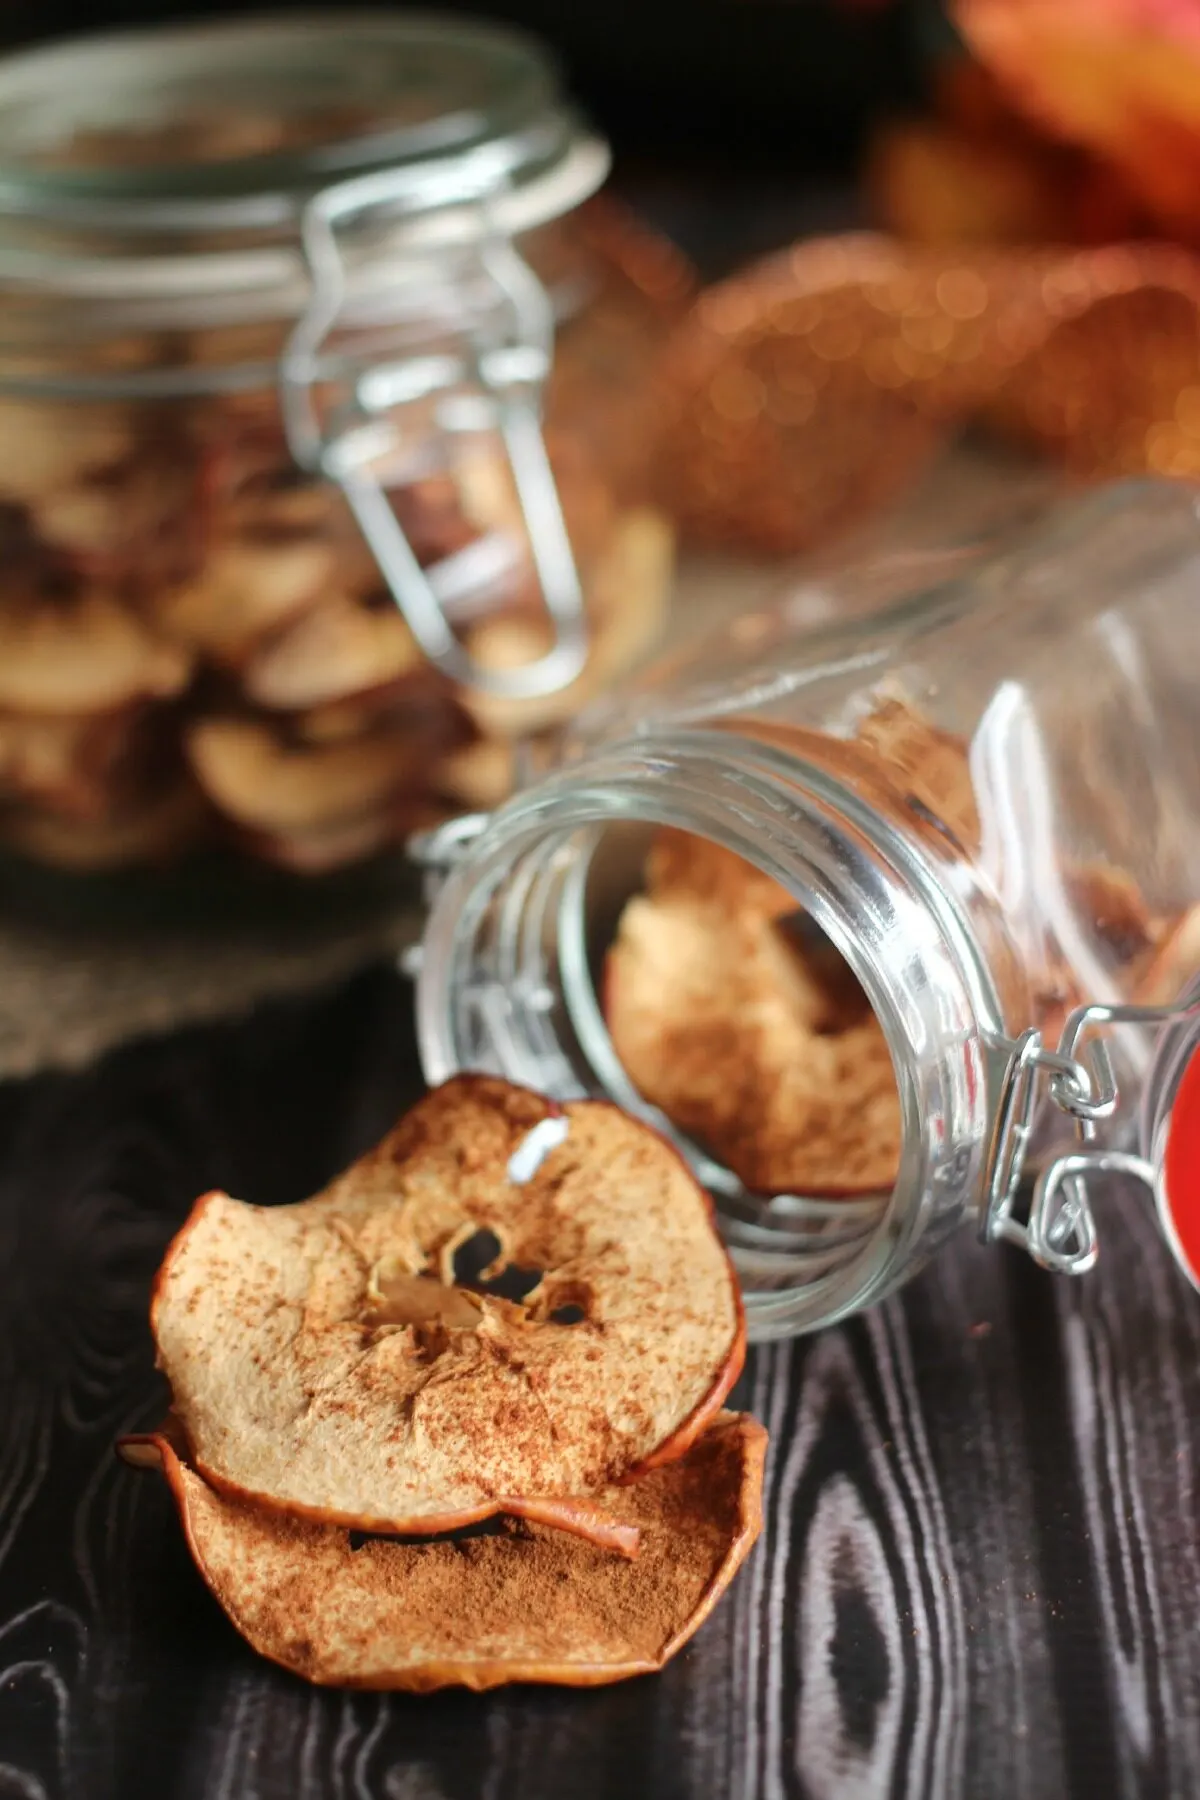 Homemade oven dried apples recipe. A delicious, healthy and easy to make snack that are dried slowly in the oven with a sprinkle of cinnamon.